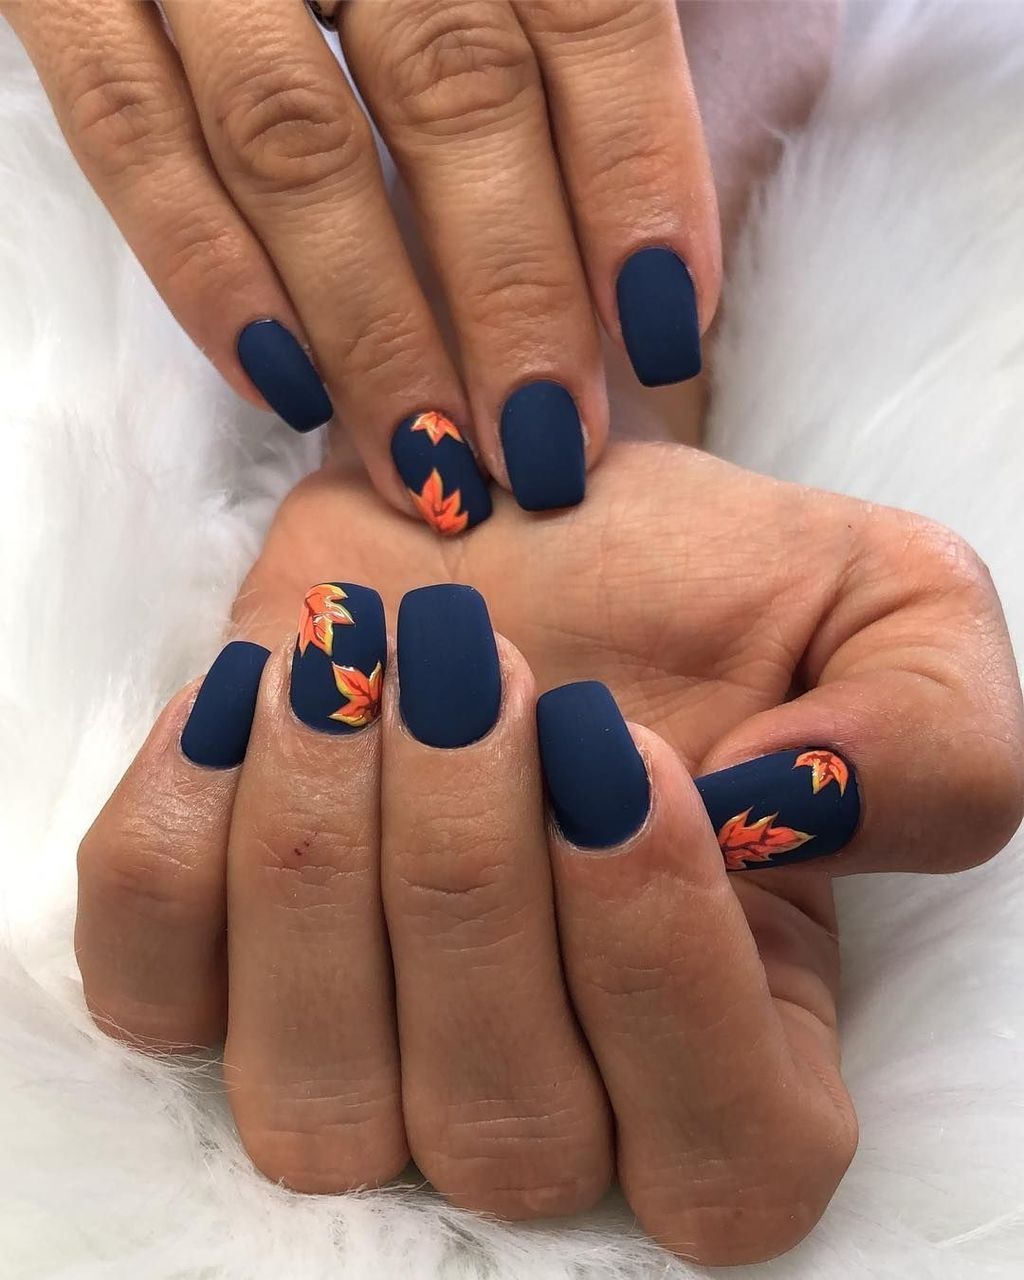 42 Outstanding Fall Nails Designs Ideas That Make You Want To Copy Gelove Nehty Design Nehtu Nehet